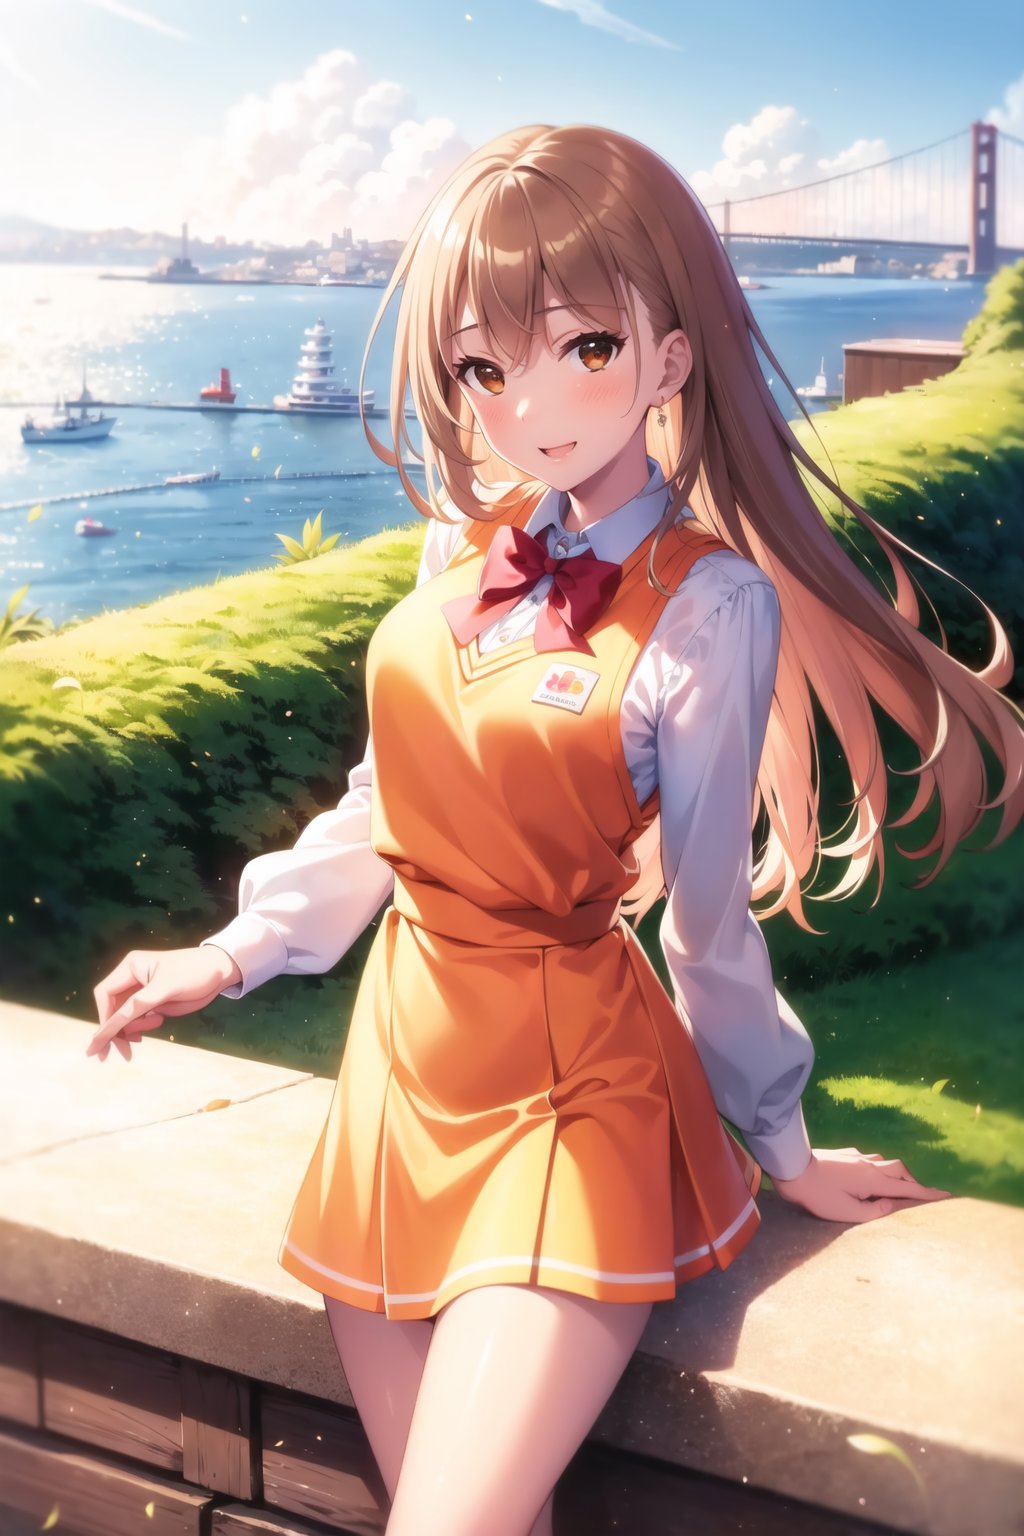 (masterpiece, Best  Quality,  High Quality,  Best Picture Quality Score: 1.3),  (Sharp Picture Quality),  Perfect Beauty: 1.5,light brown Hair,long hair  (Japanese School Uniform),  One,  (Cute School Uniform),  Beautiful Girl,  Cute,mini Skirt,  Very Beautiful View,  Hill with a view of the Bosphorus Strait in Istanbul,Fluttering Skirt,  (Most fantastic view), A girl standing on a hilltop,best smile,Yellow vest,hikari